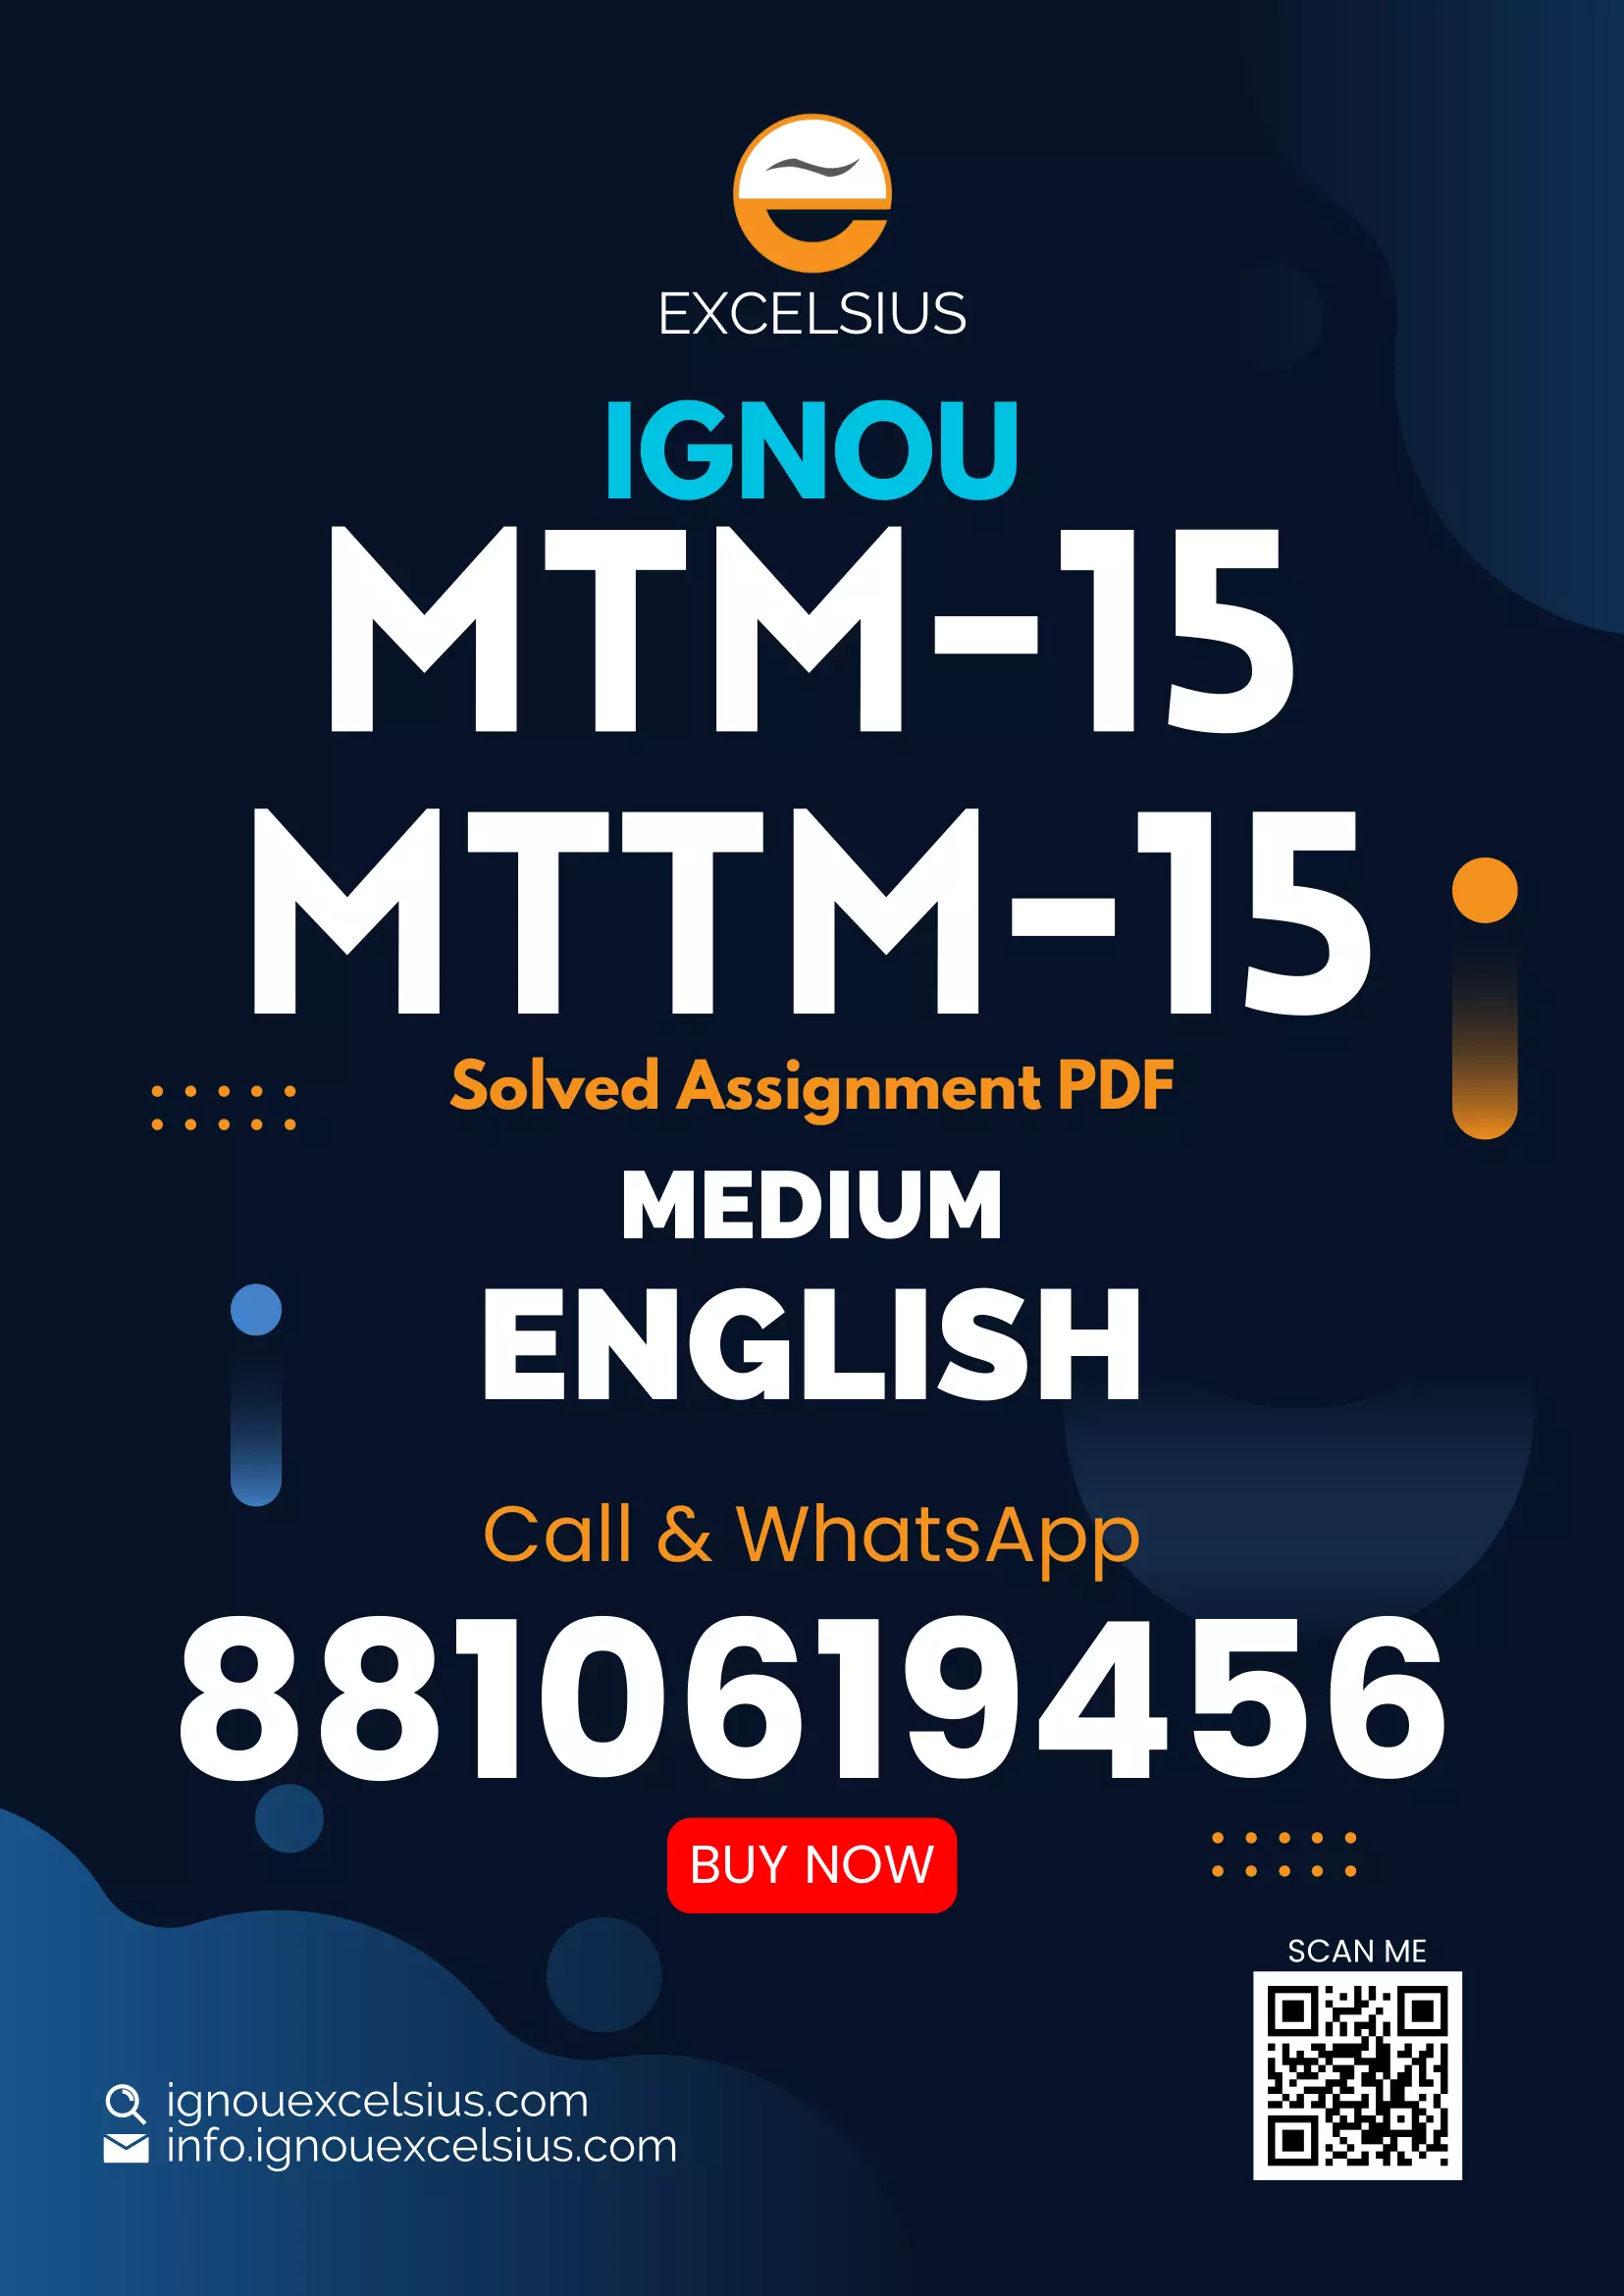 IGNOU MTM-15/MTTM-15 - Meetings, Incentives, Conference and Expositions (MICE), Latest Solved Assignment-January 2023 - July 2023